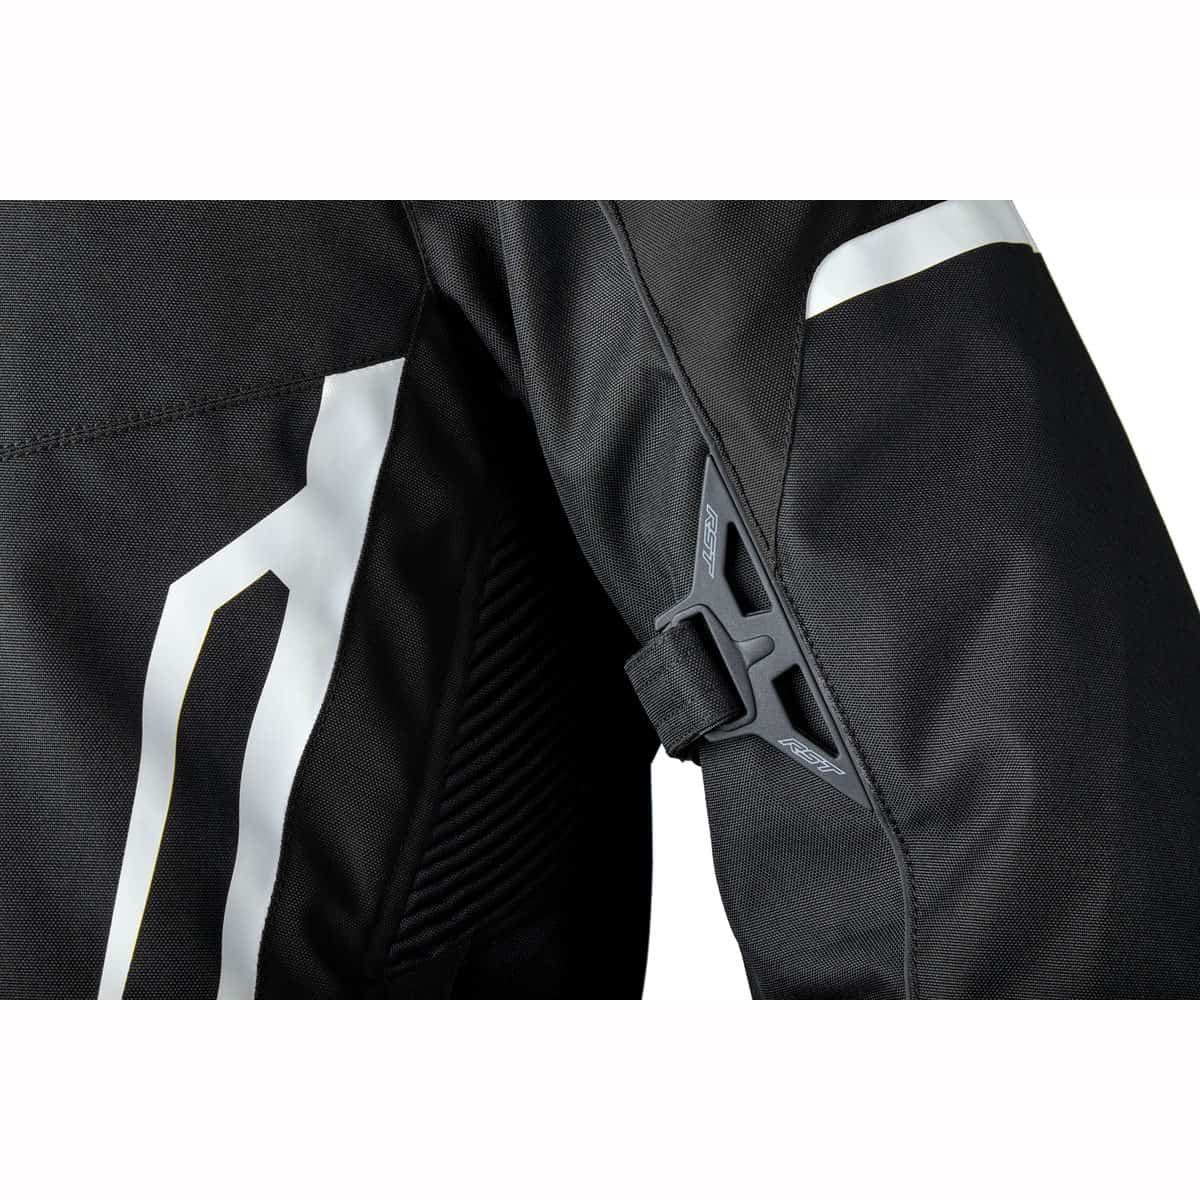 Short, sporty textile motorcycle jacket from RST packed full of protection